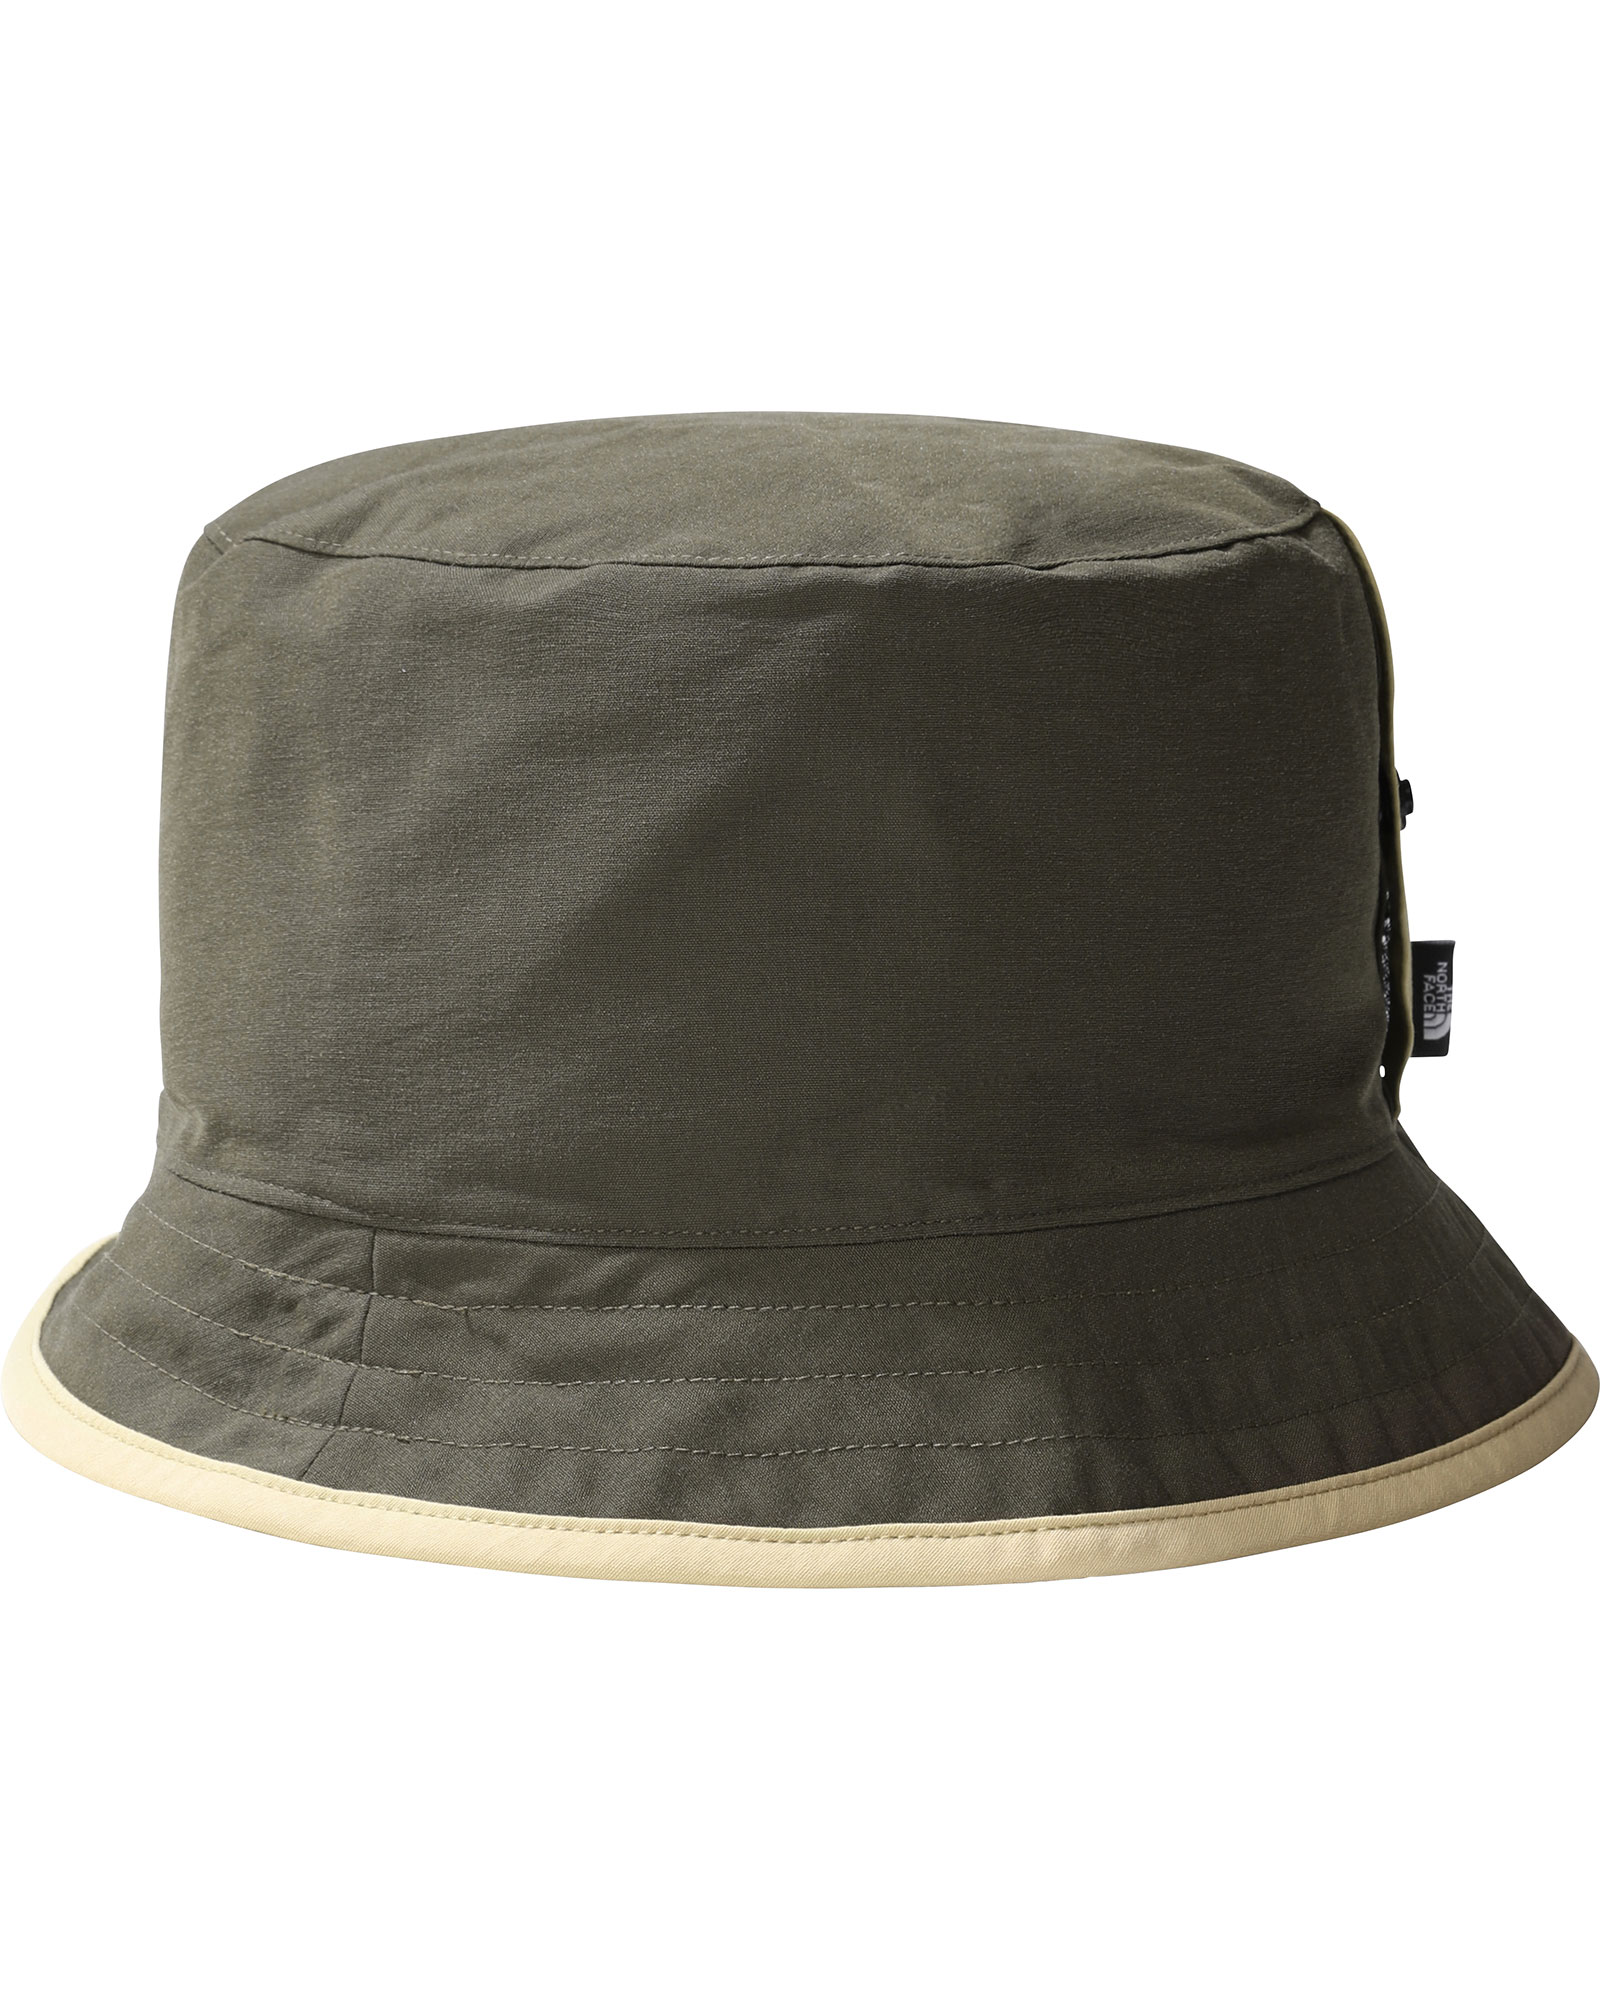 The North Face Class V Reversible Bucket Hat - New Taupe Green/Khaki S/M